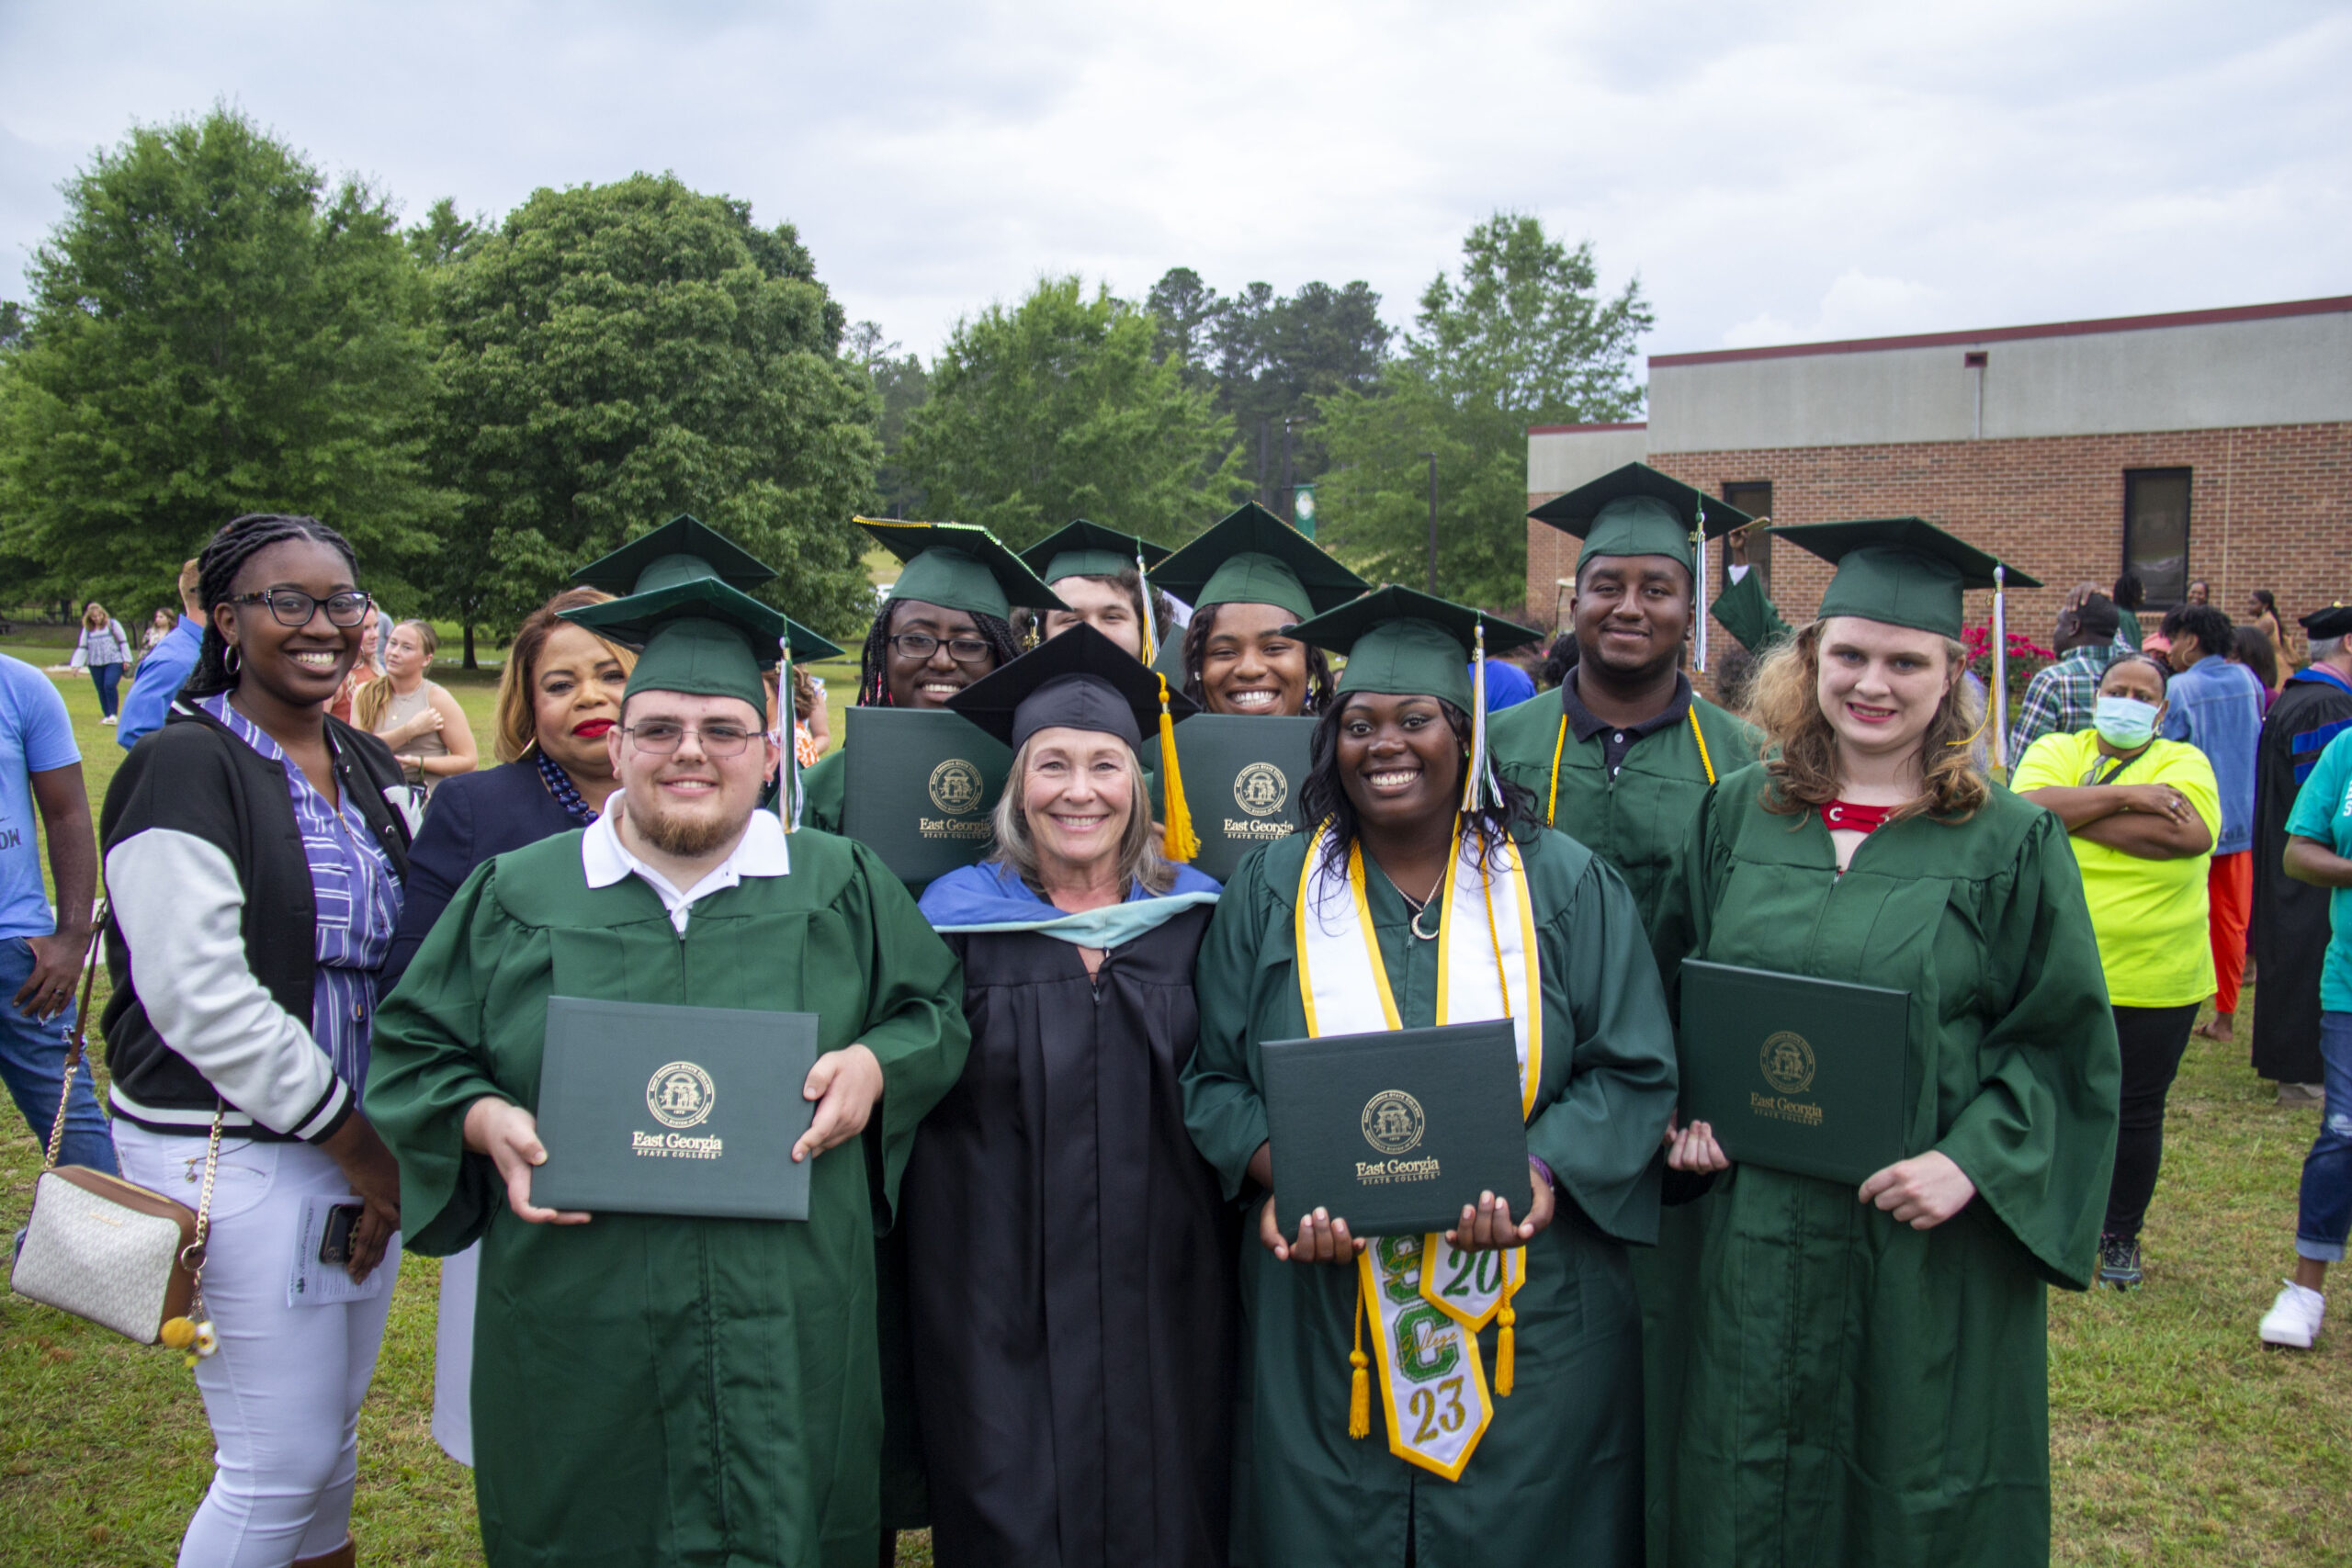 Group of graduates smiling and holding diplomas during an outdoor graduation ceremony.